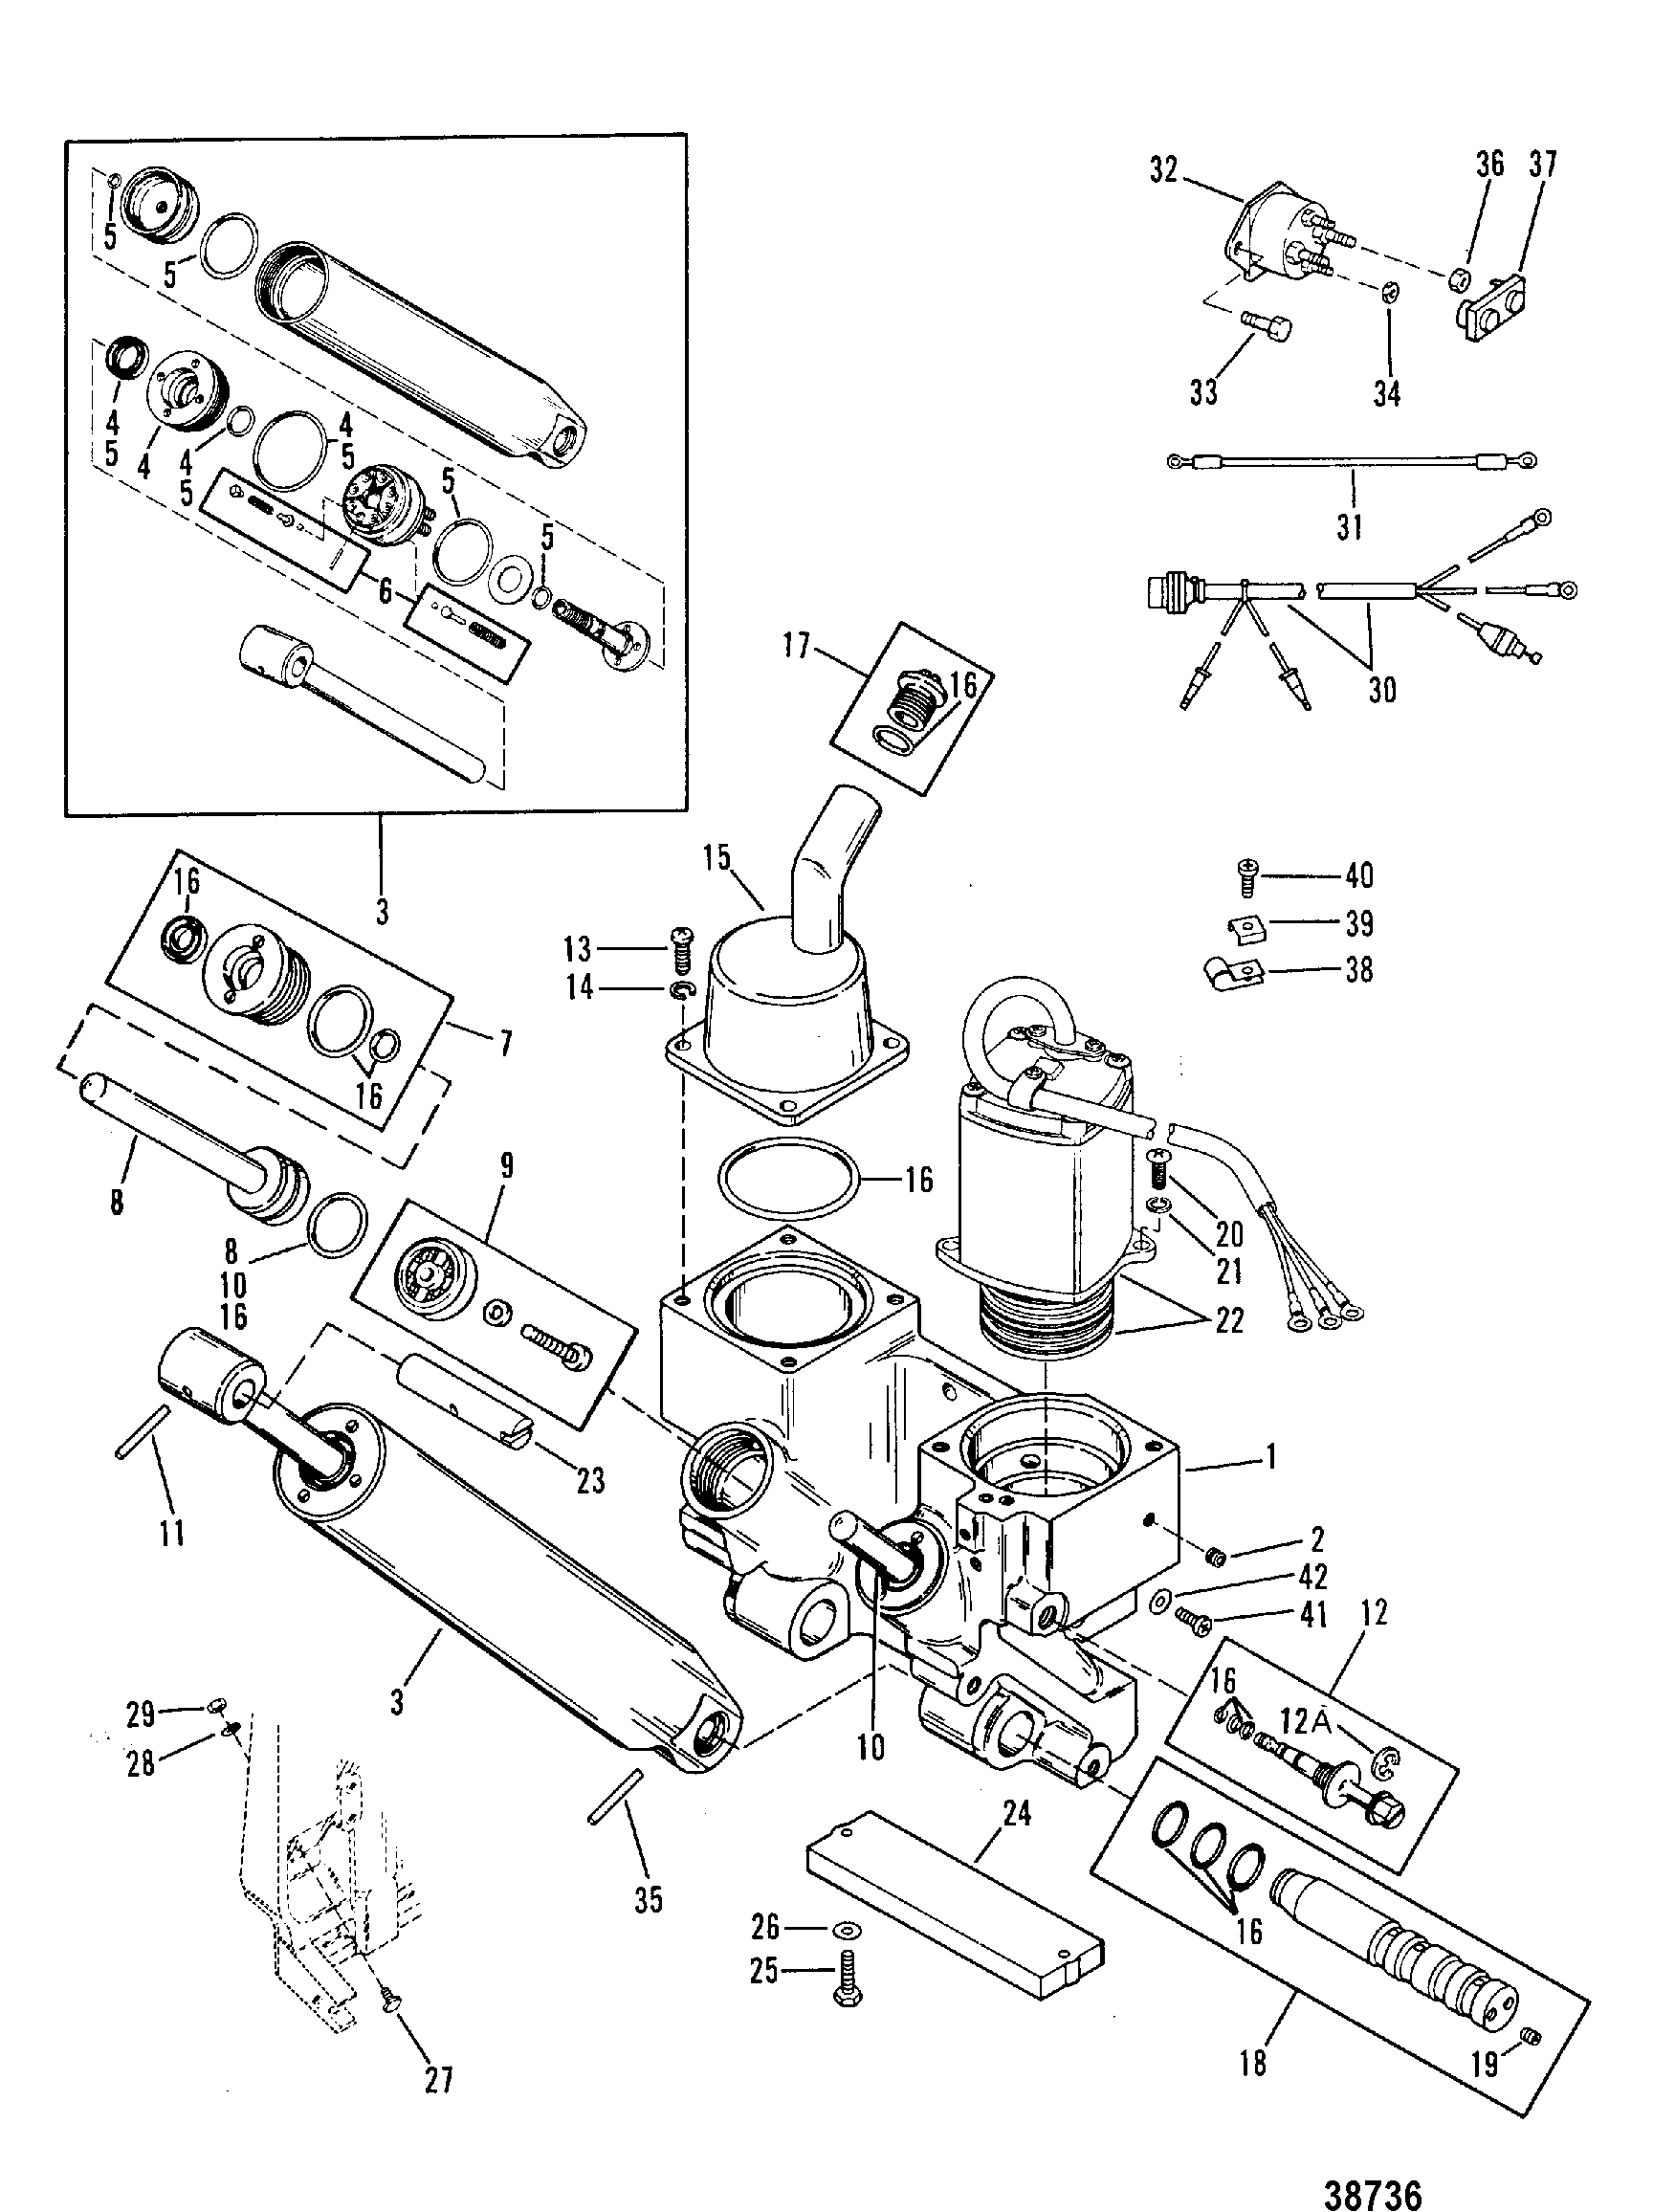 POWER TRIM COMPONENTS(0C159199 AND BELOW)